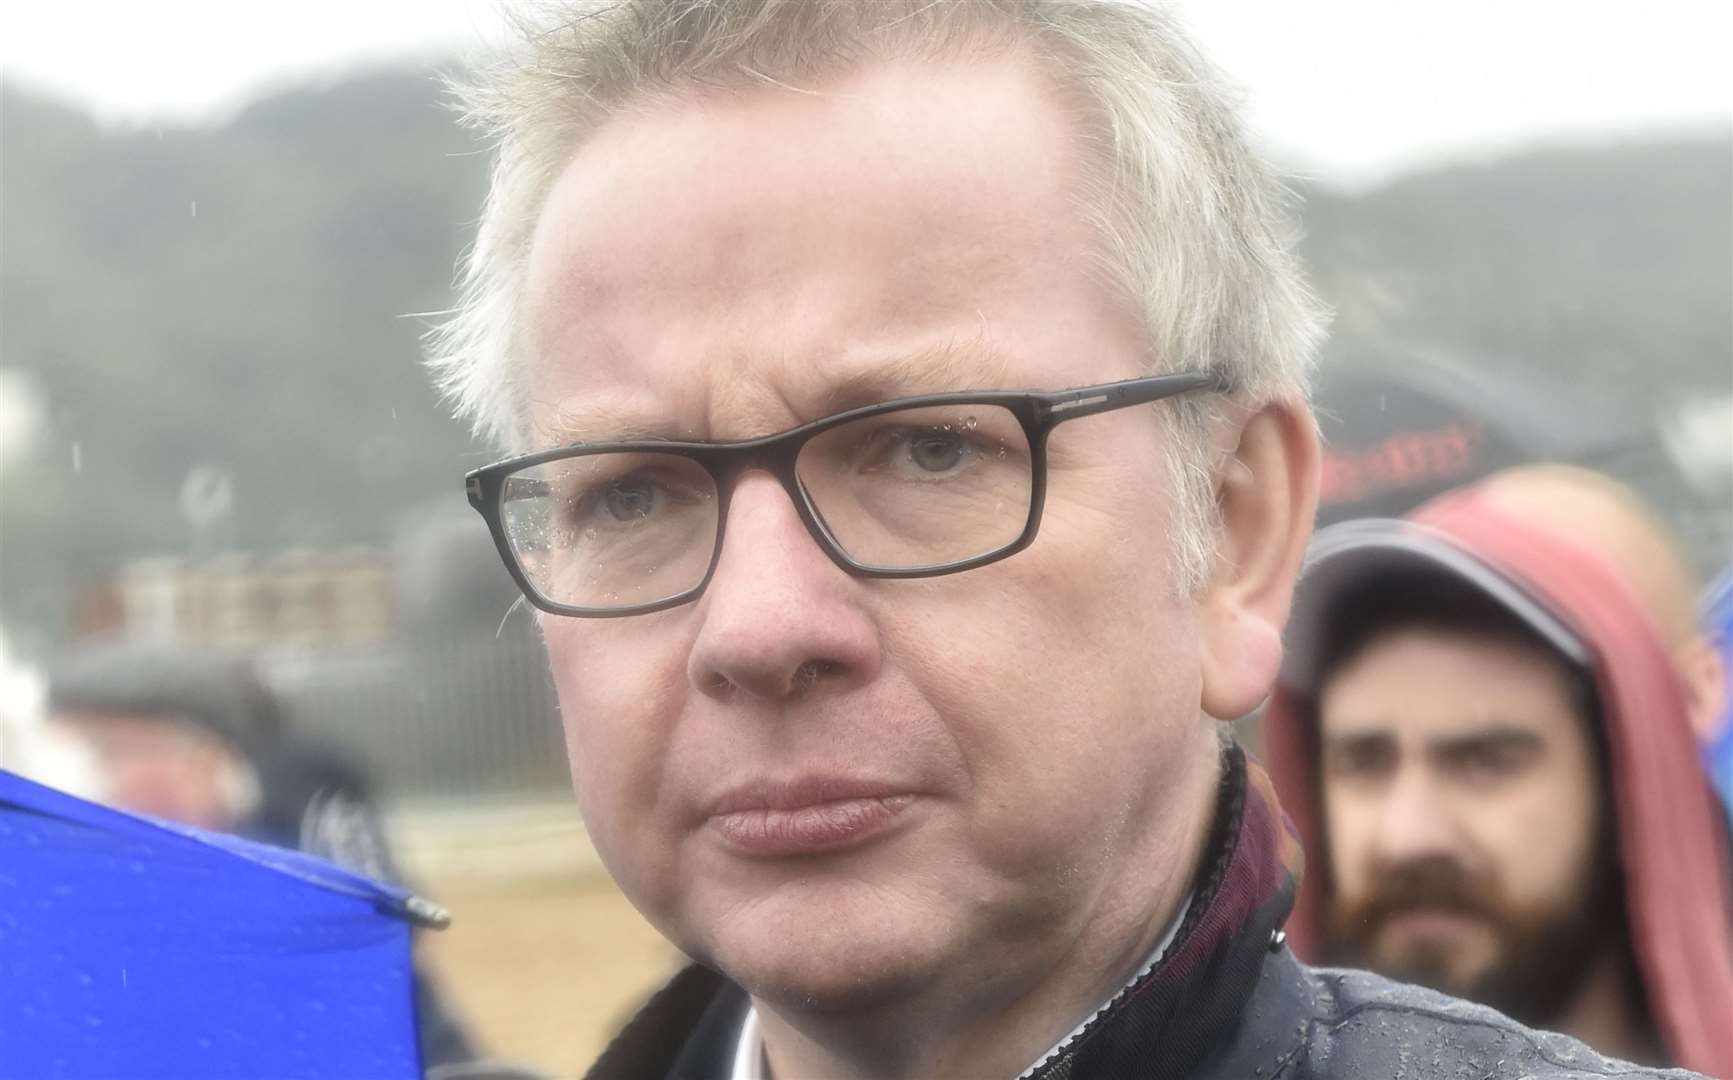 Michael Gove was in Kent recently for a meeting at the Port of Dover